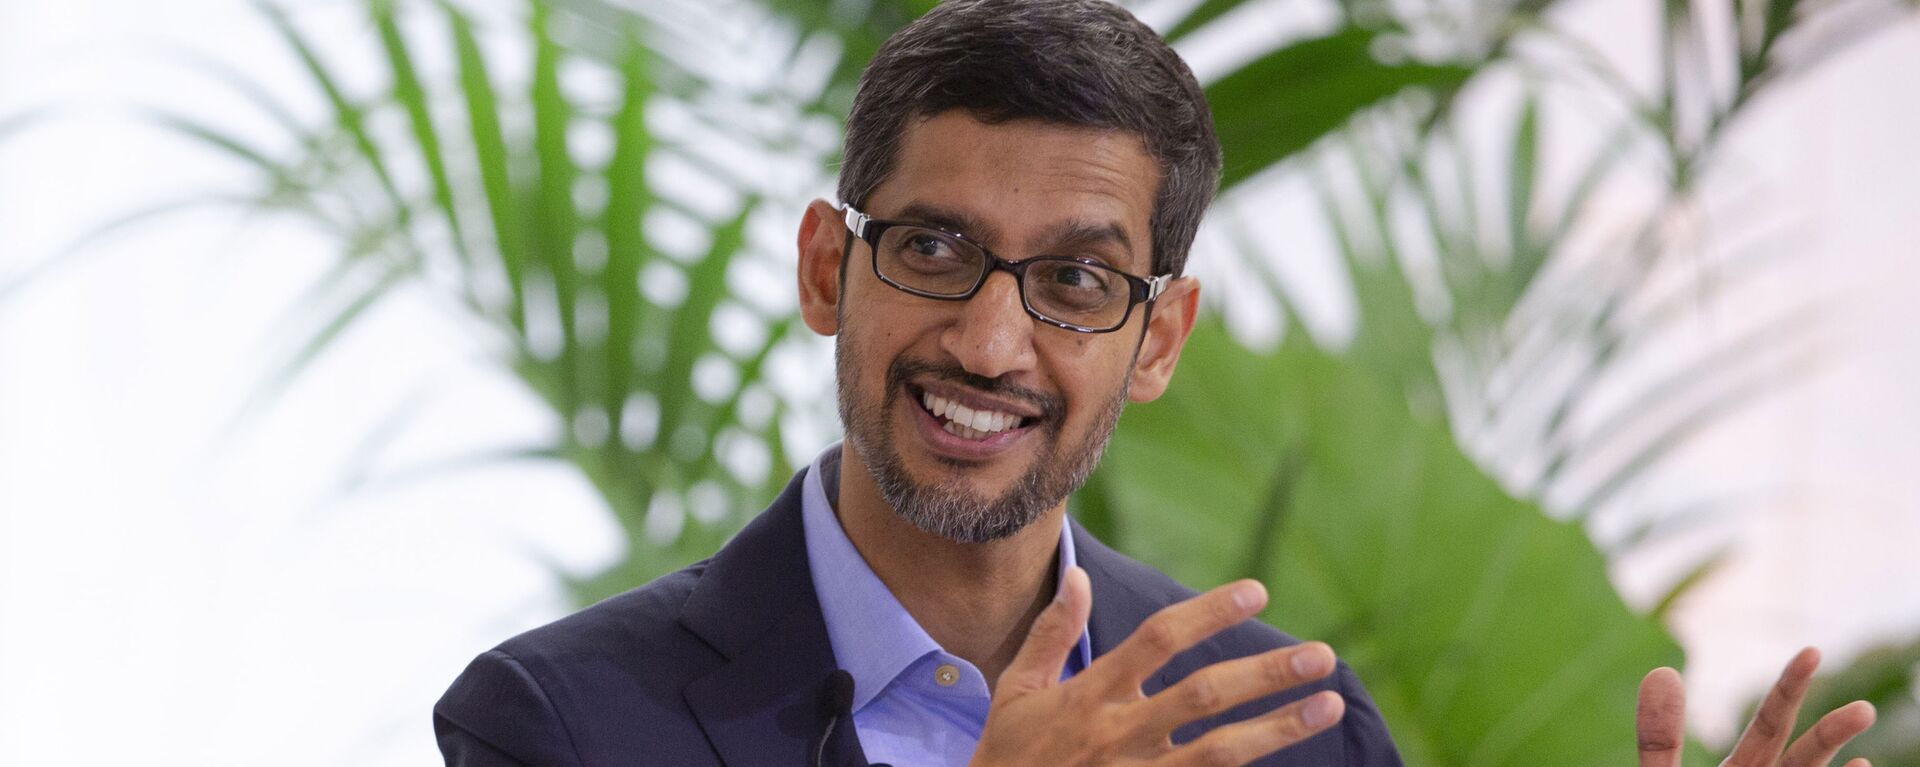 Google's chief executive Sundar Pichai addresses the audience during an event on artificial intelligence at the Square in Brussels, Monday, Jan. 20, 2020 - Sputnik International, 1920, 13.07.2021